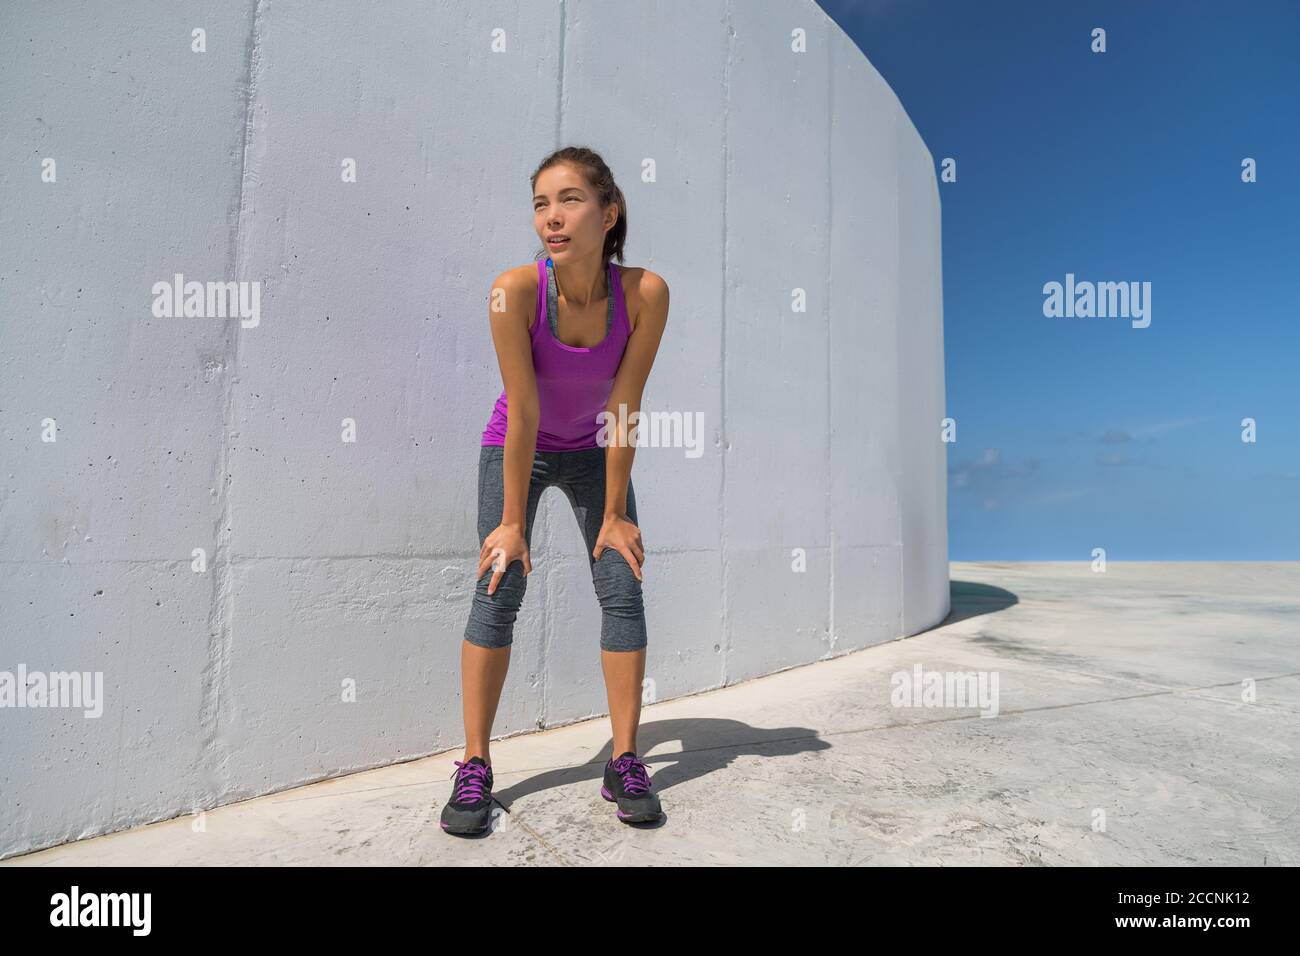 Runner woman tired resting catching breath during cardio workout. Motivation and determination athlete girl ready to run Stock Photo